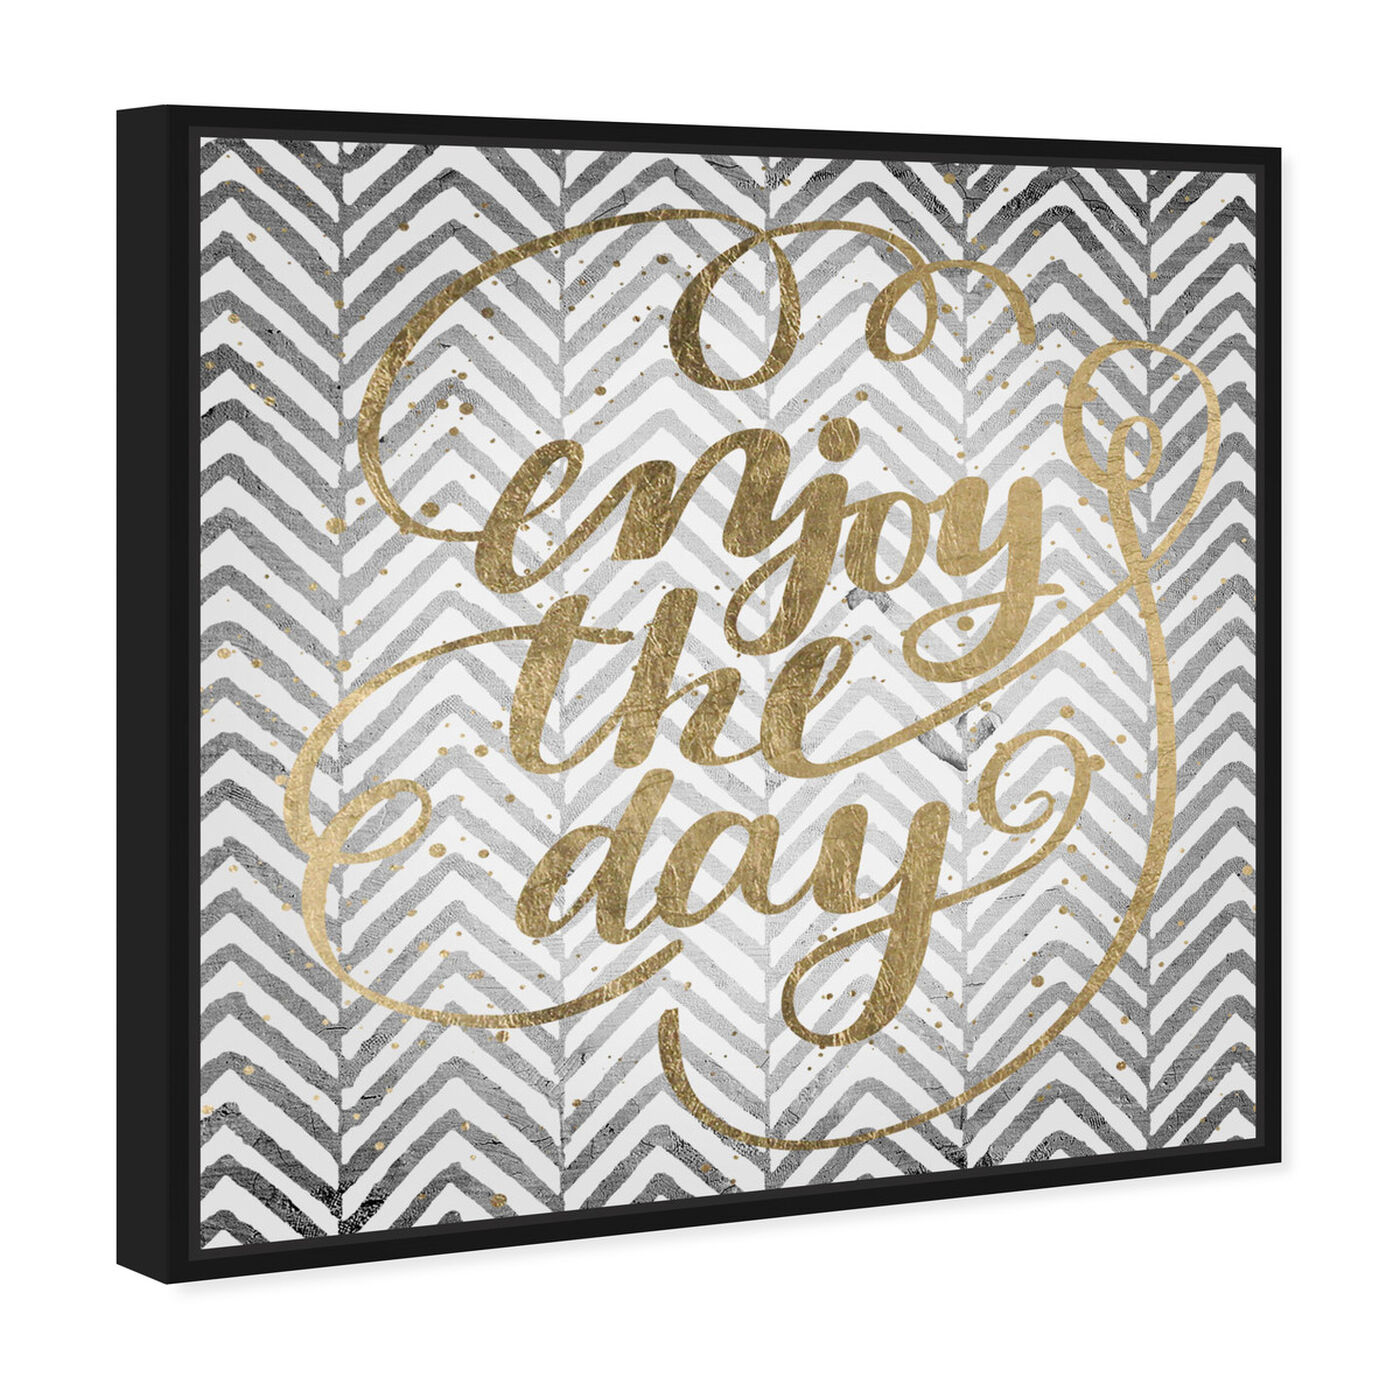 Angled view of Enjoy All Days featuring typography and quotes and inspirational quotes and sayings art.